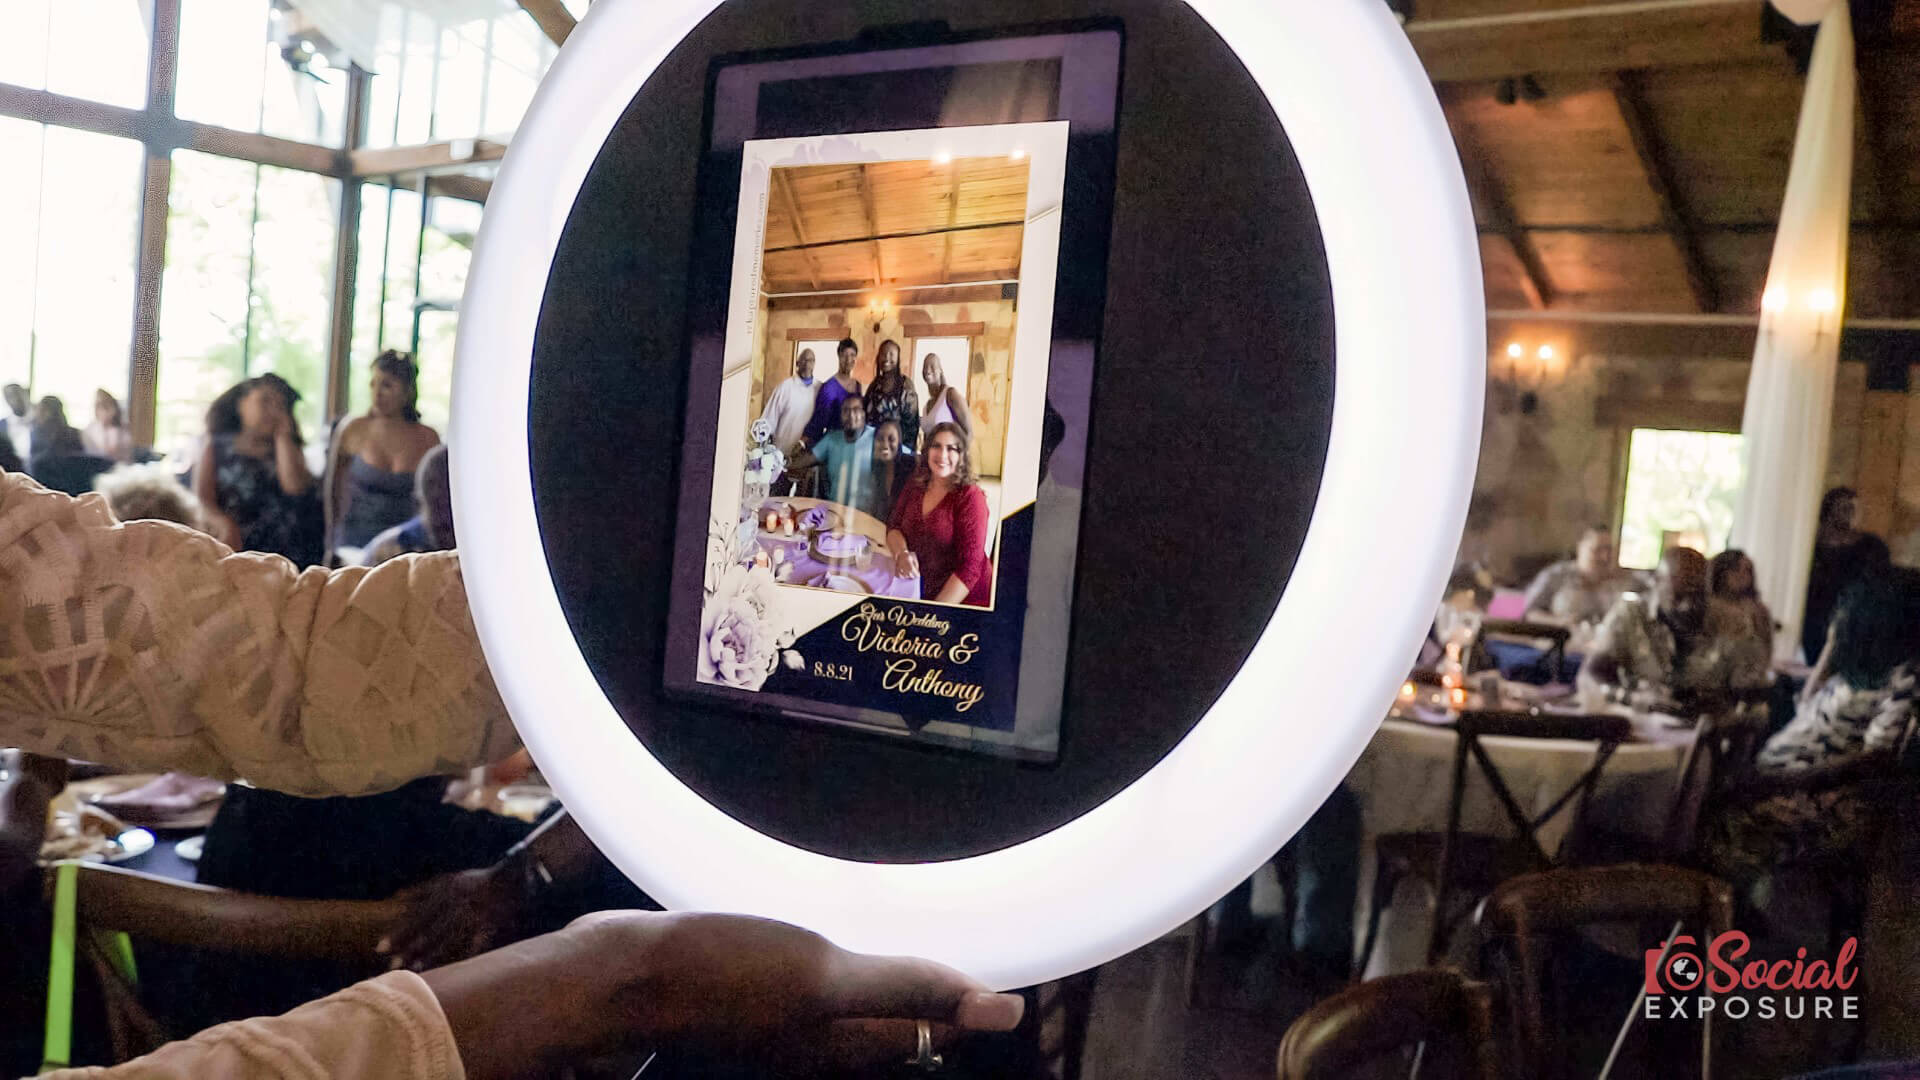 close up of a photo booth screen which is showing a photo taken at a wedding